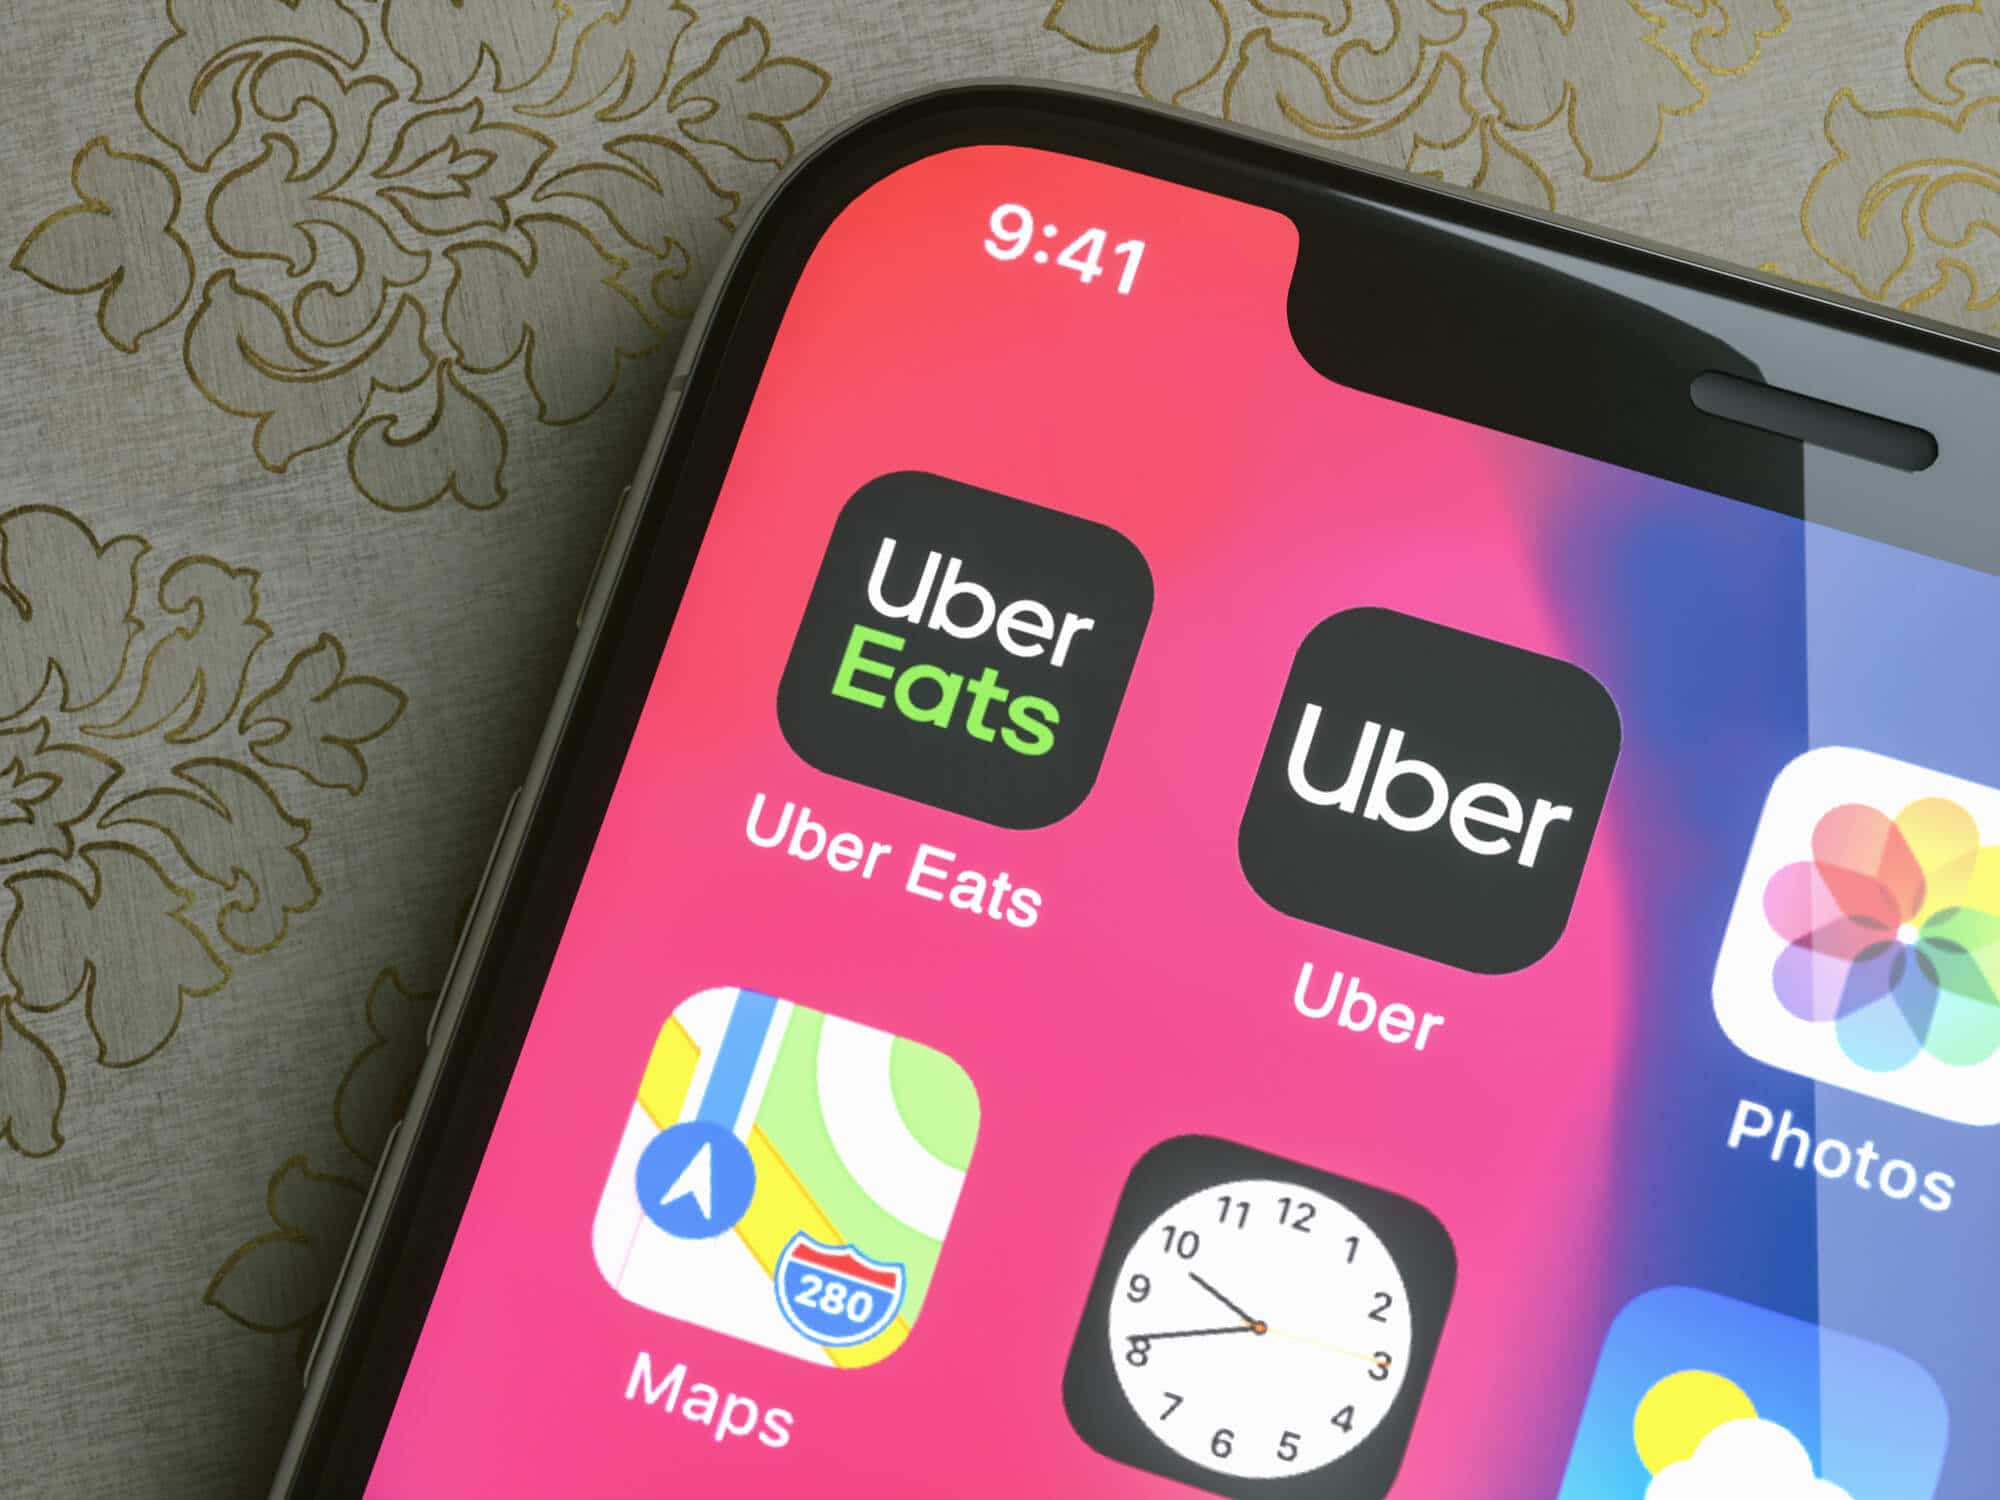 Uber apps on cell phone screen